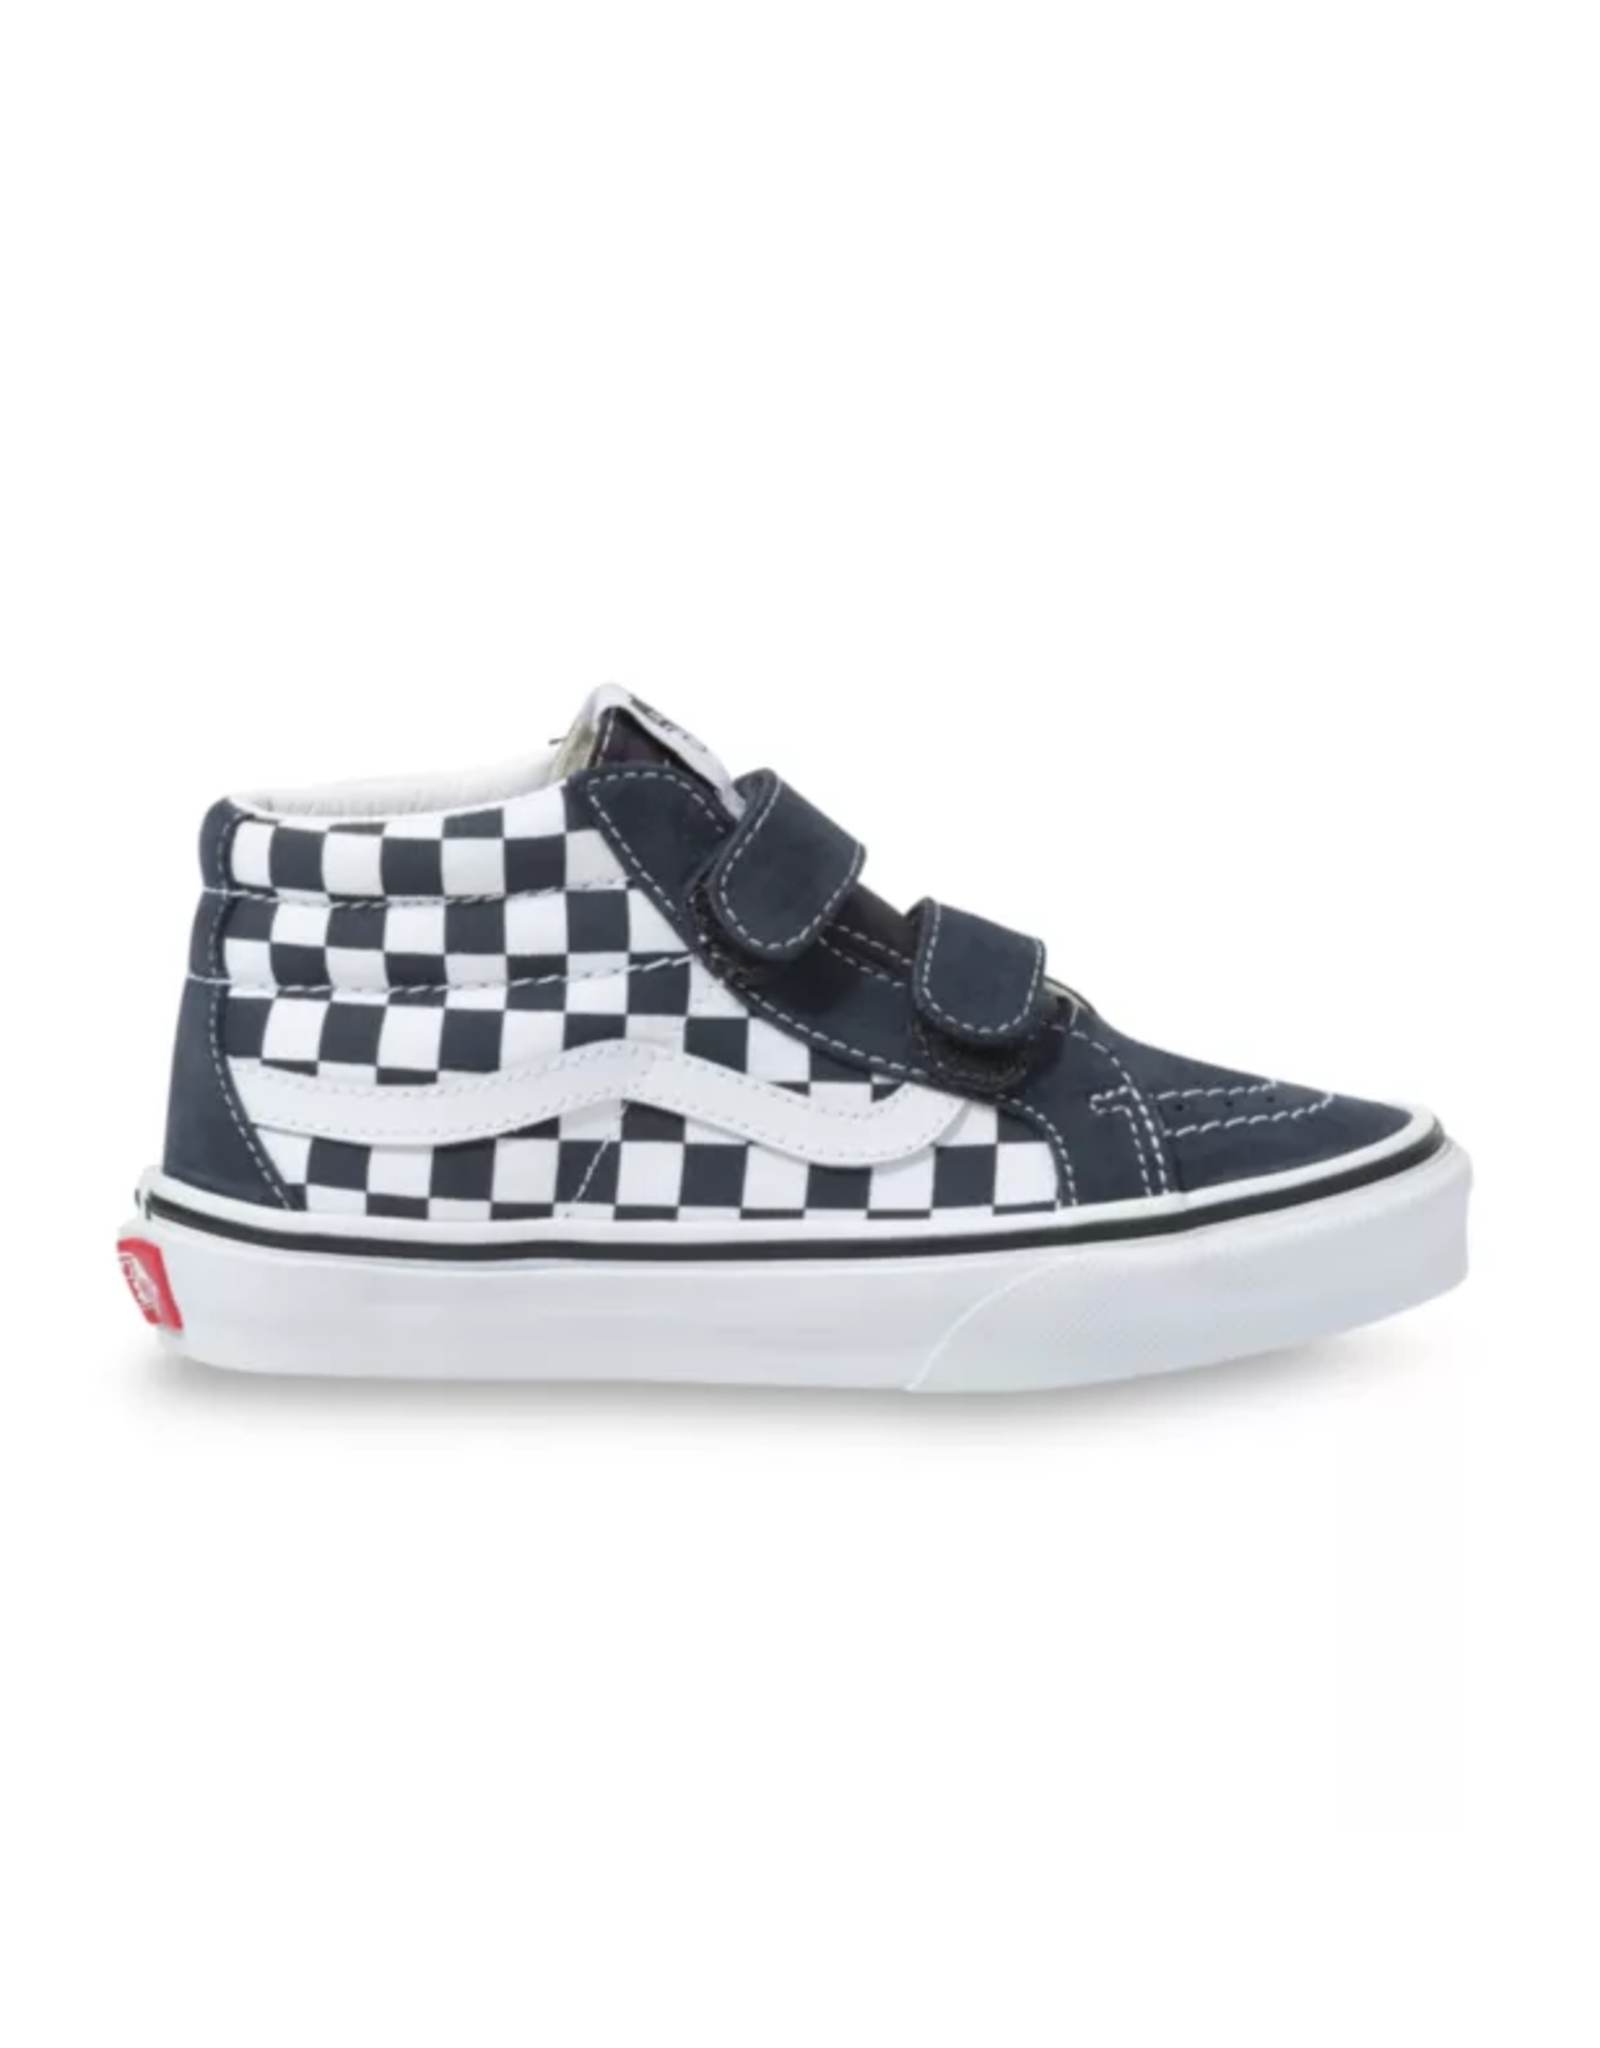 youth checkerboard vans